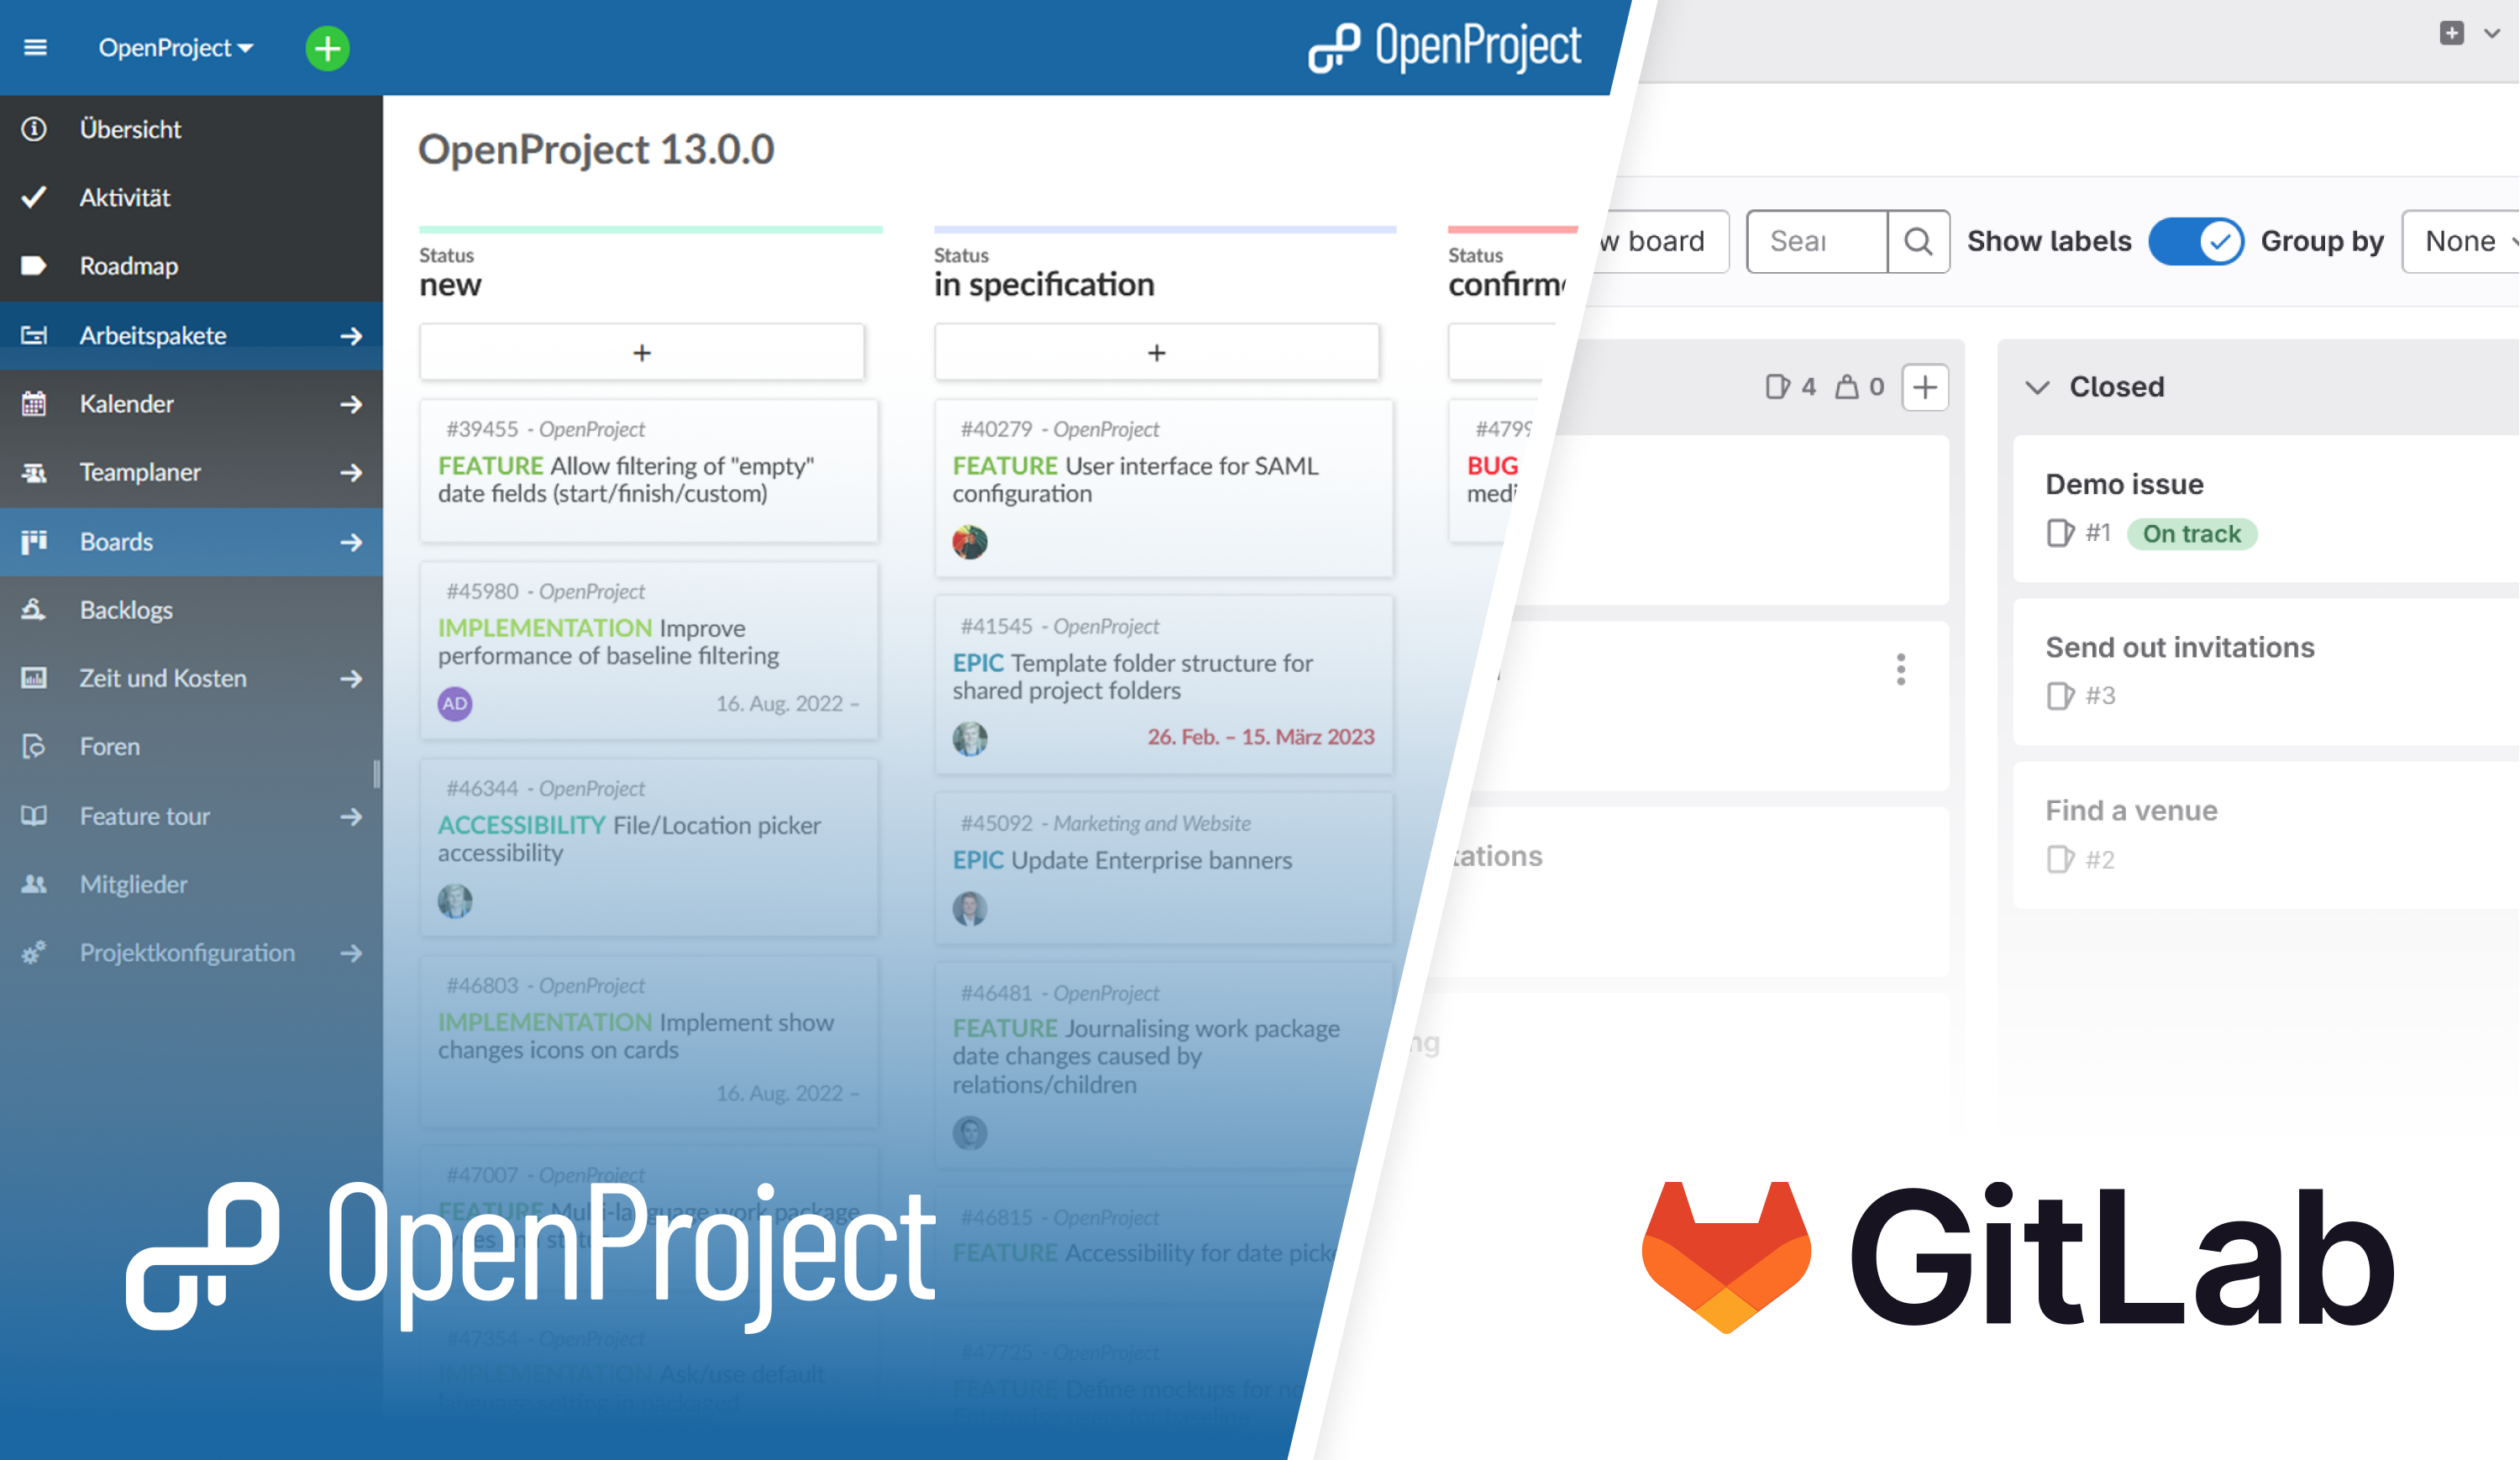 OpenProject - an alternative to GitLab for open source project management